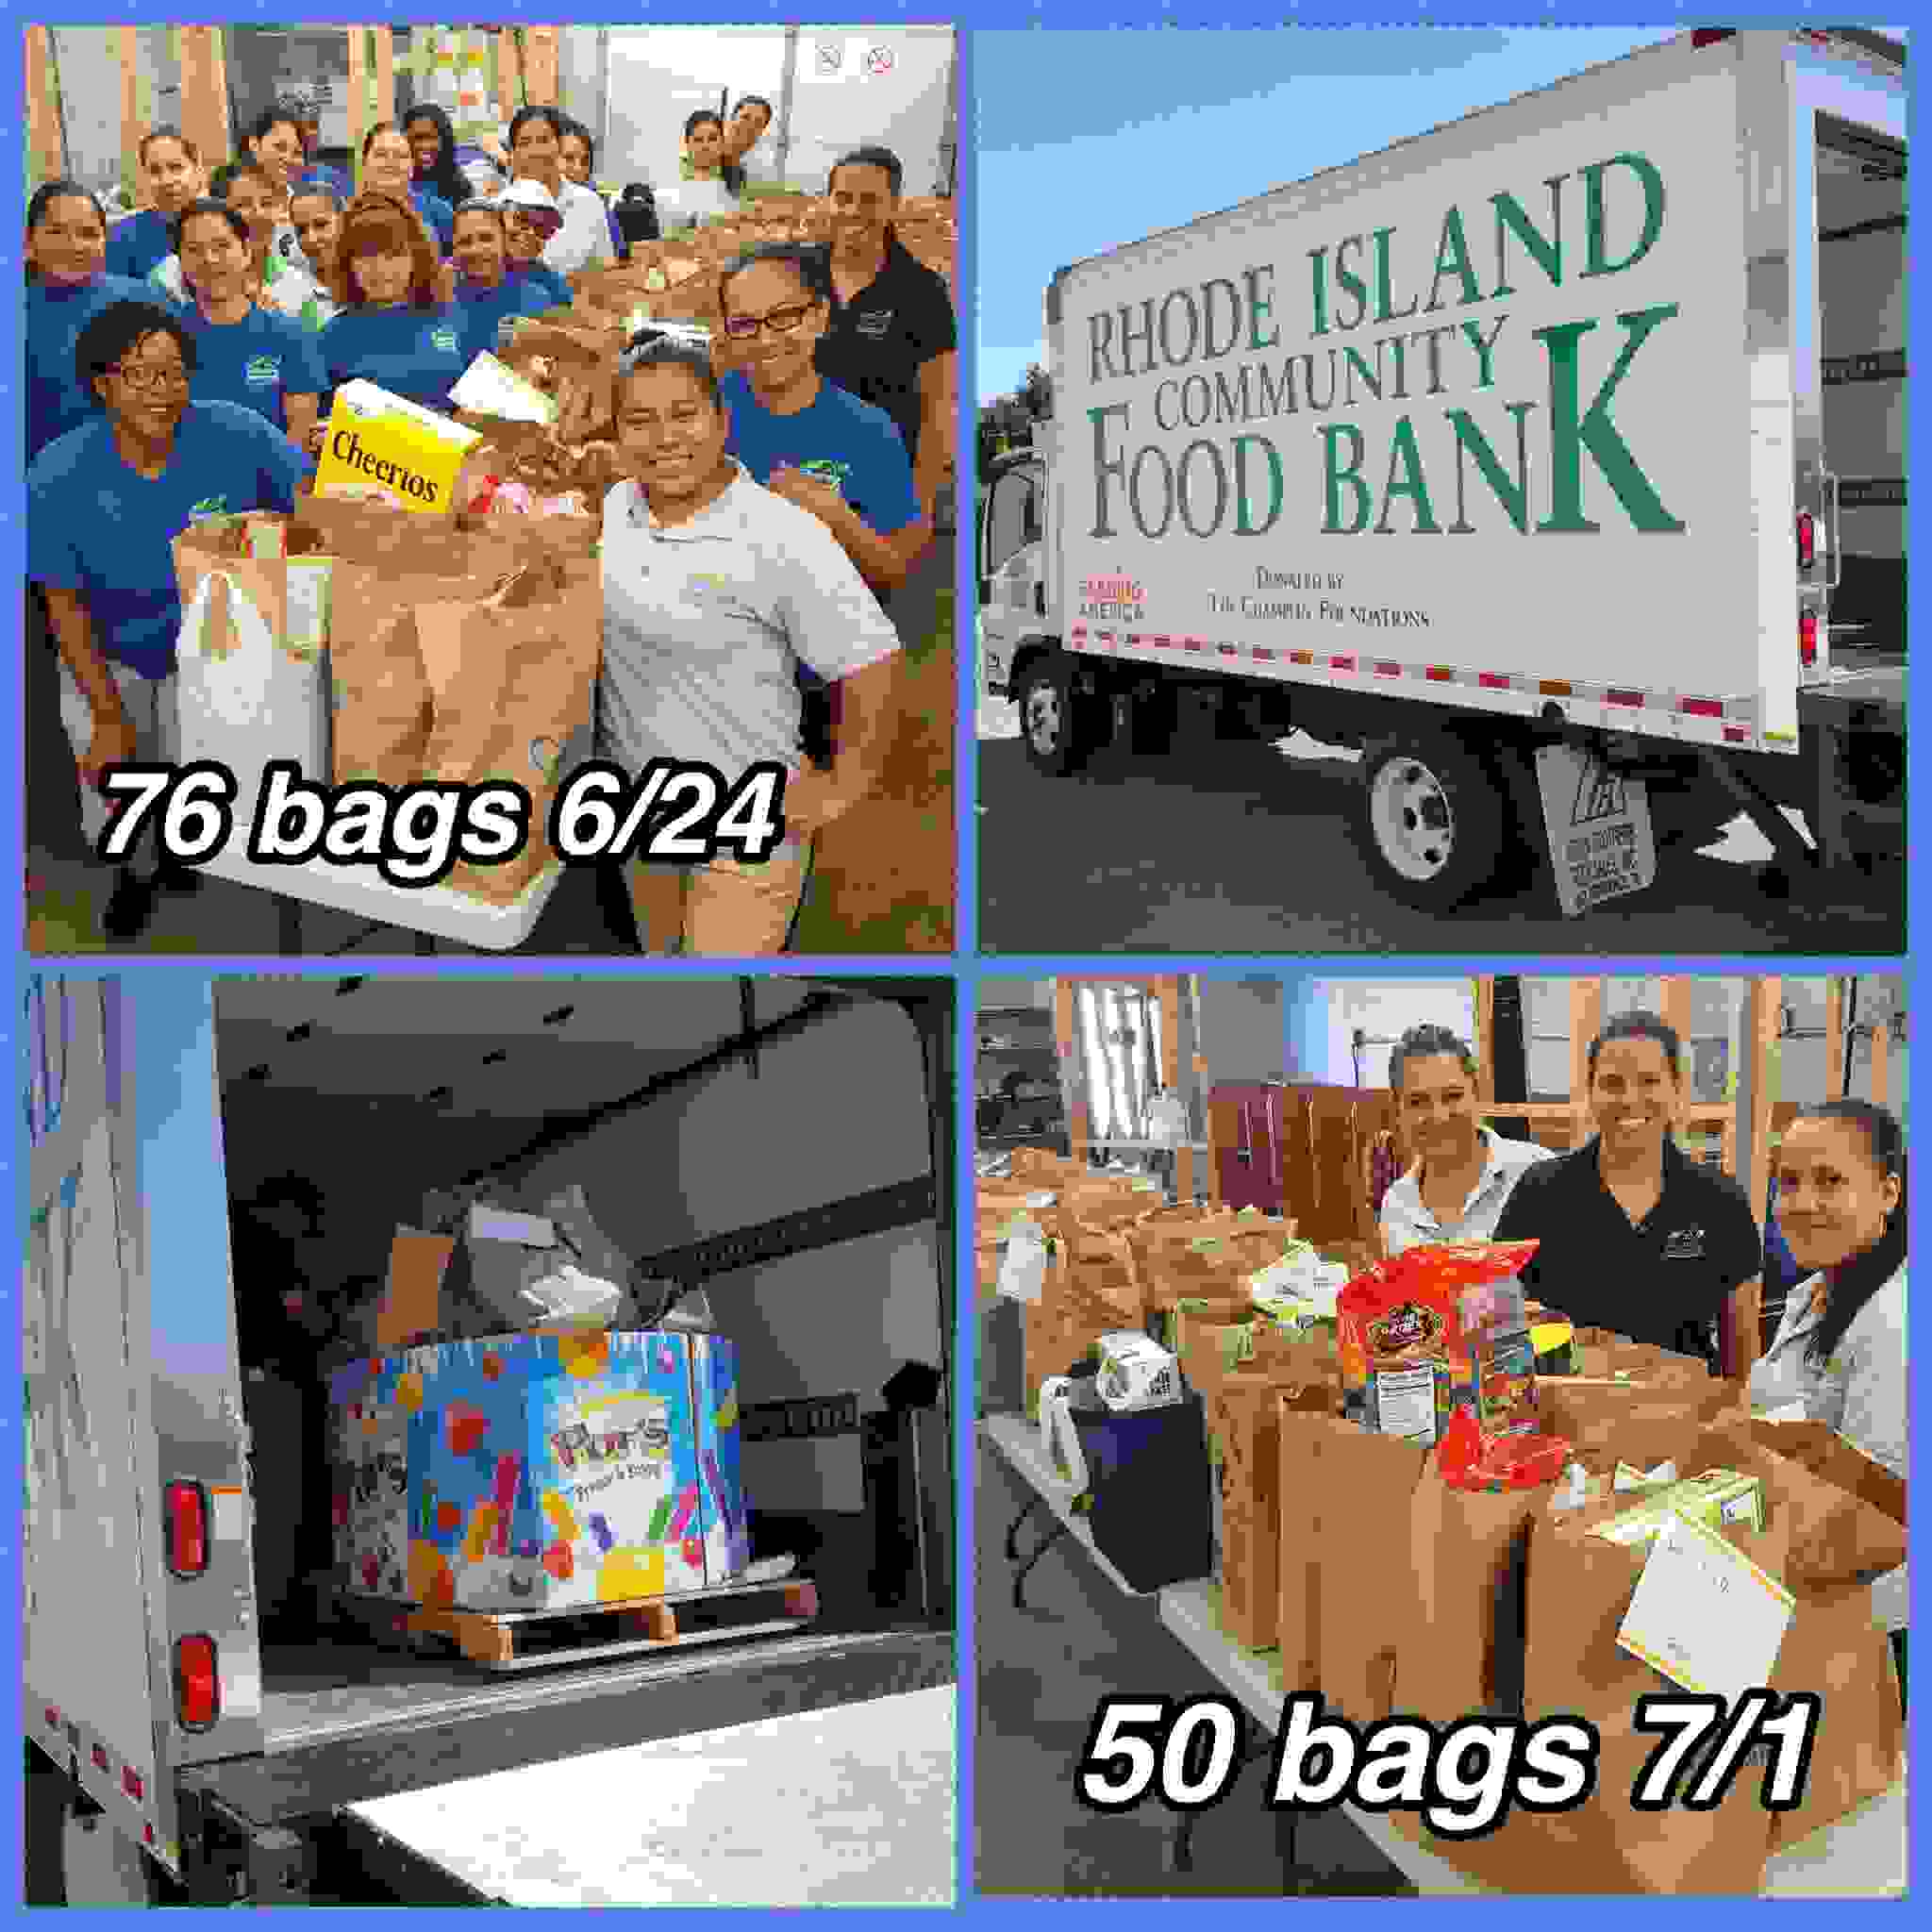 Pictures of the TCA Johnston team with donations collected for the Rhode Island Community Food Bank.